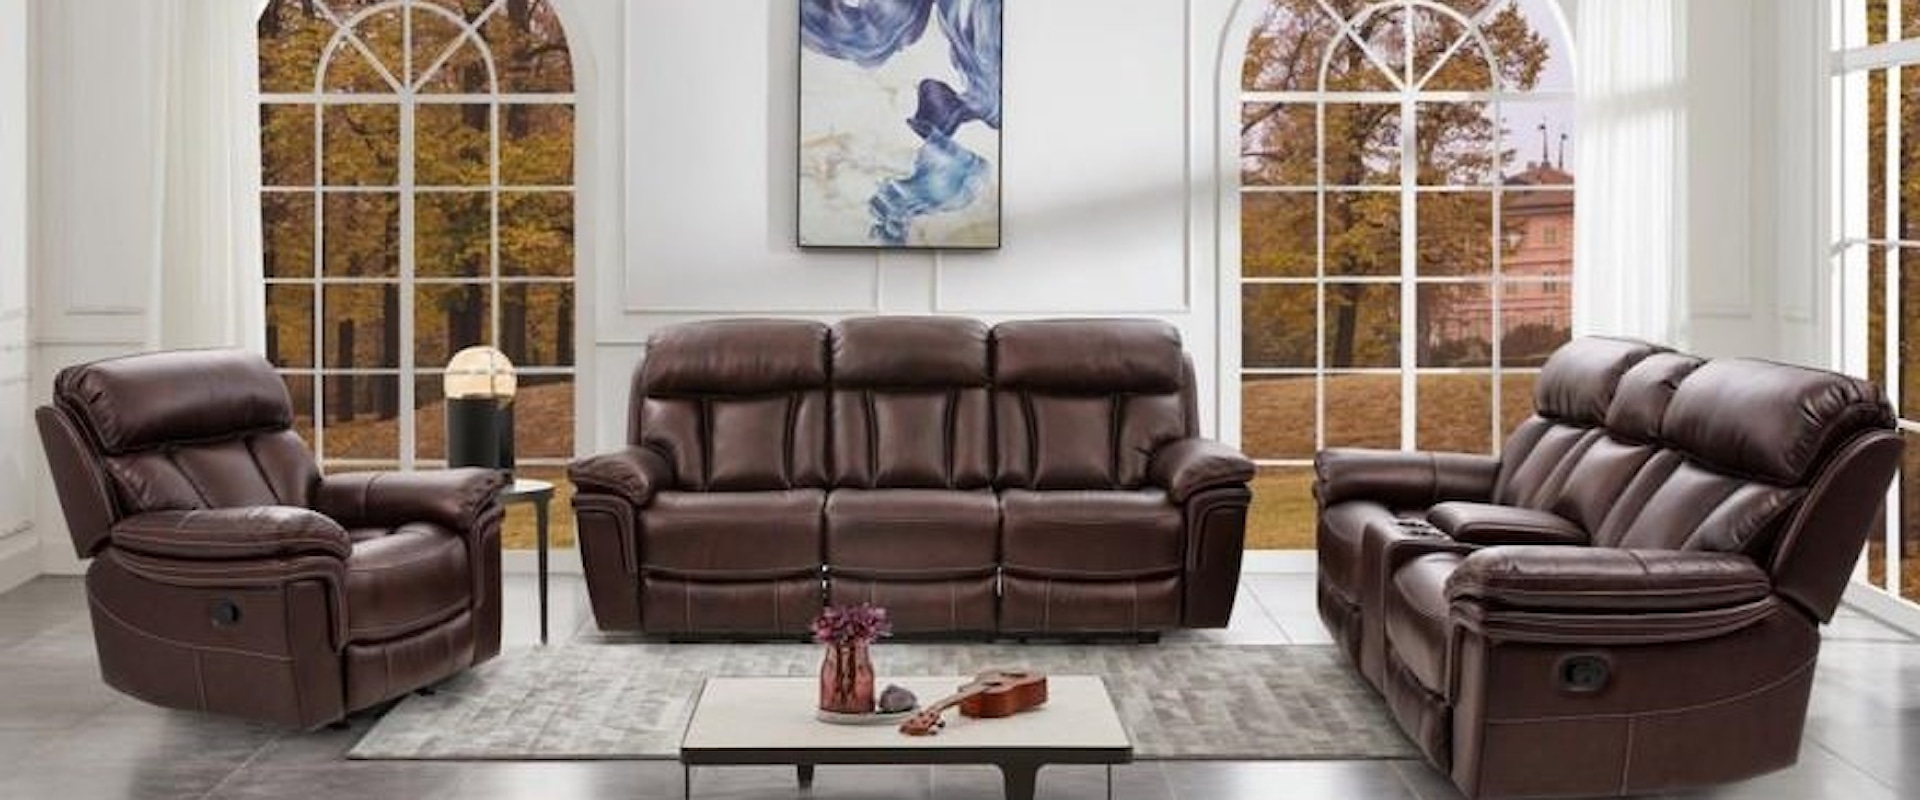 Power Reclining Sofa, Power Reclining Loveseat with Center Storage Console and Power Recliner Set